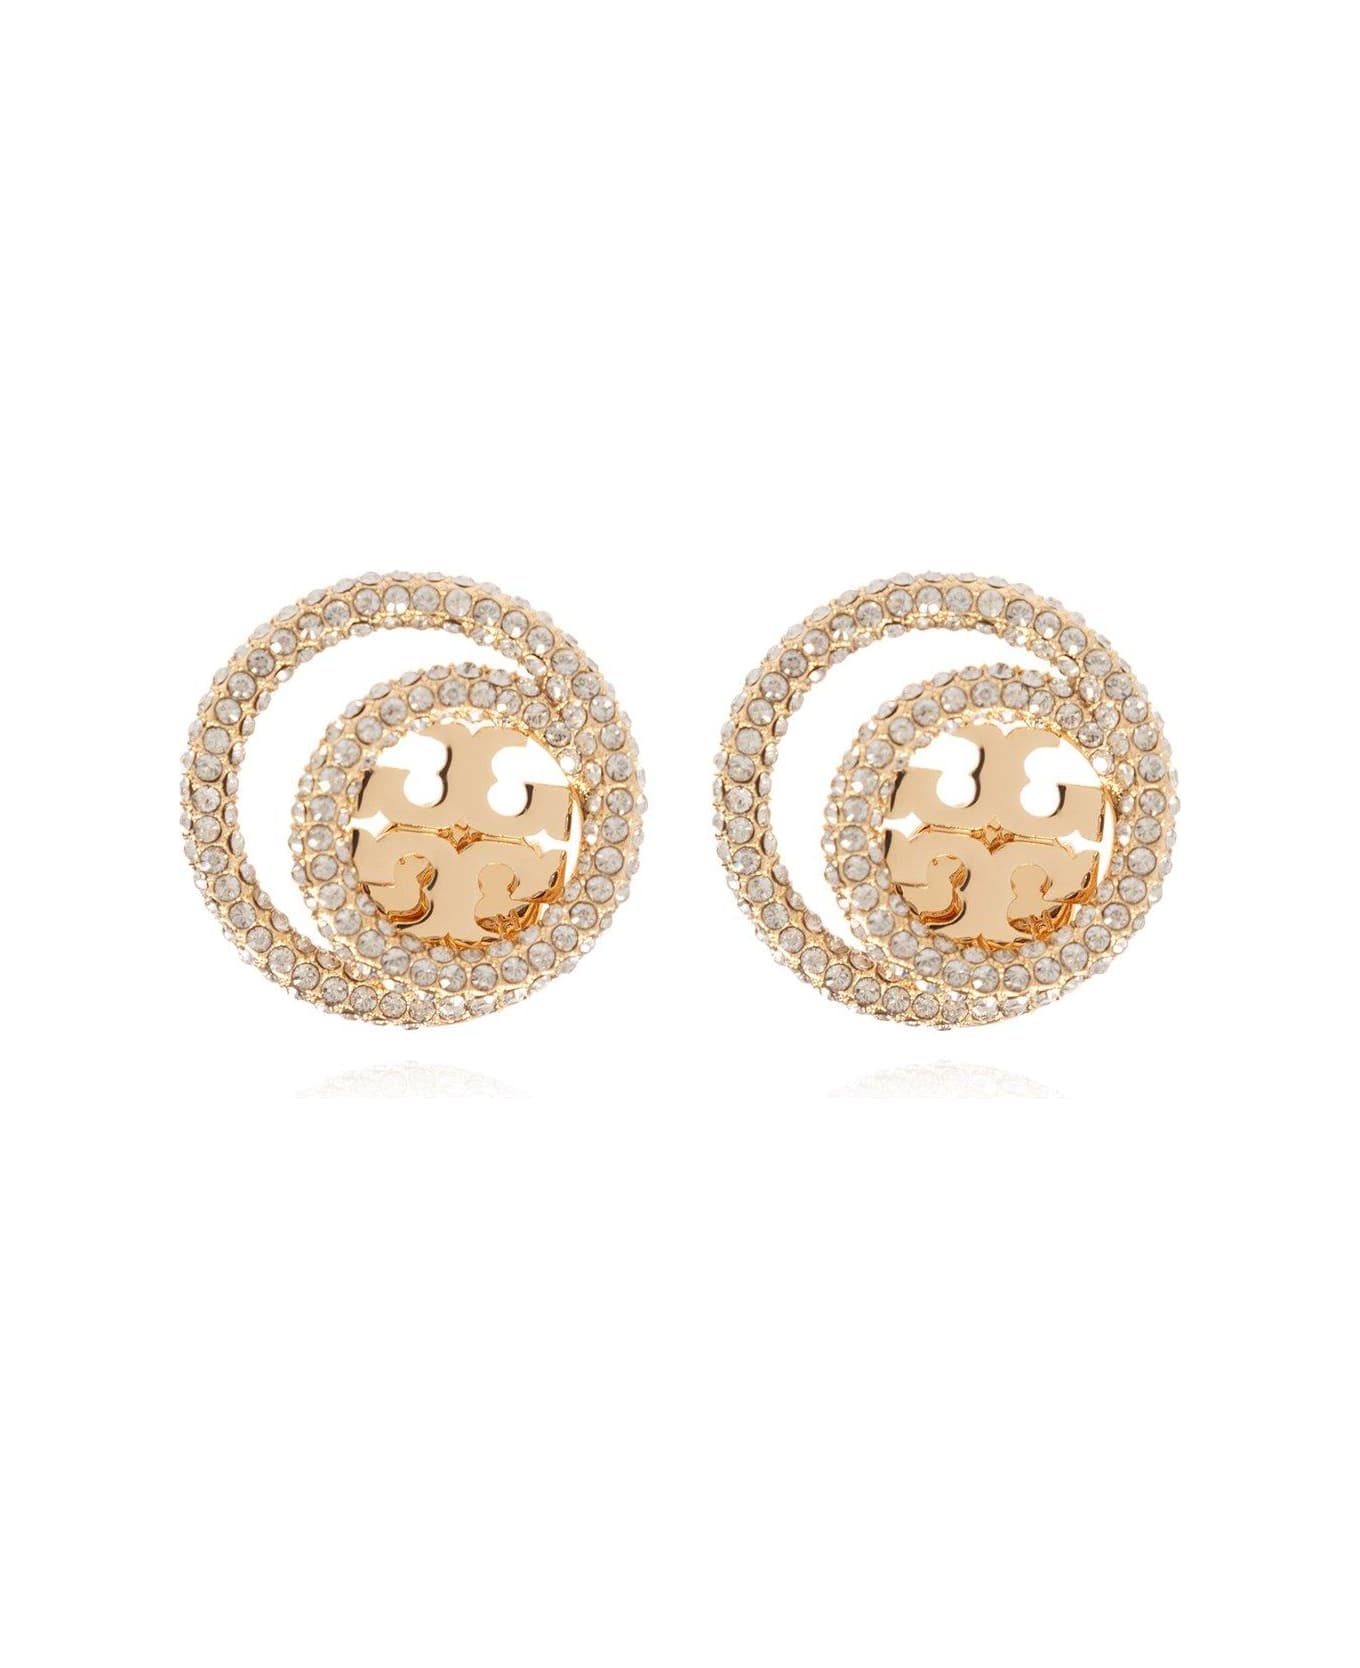 Tory Burch Double-ring Embellished Earrings - Gold/crystal イヤリング